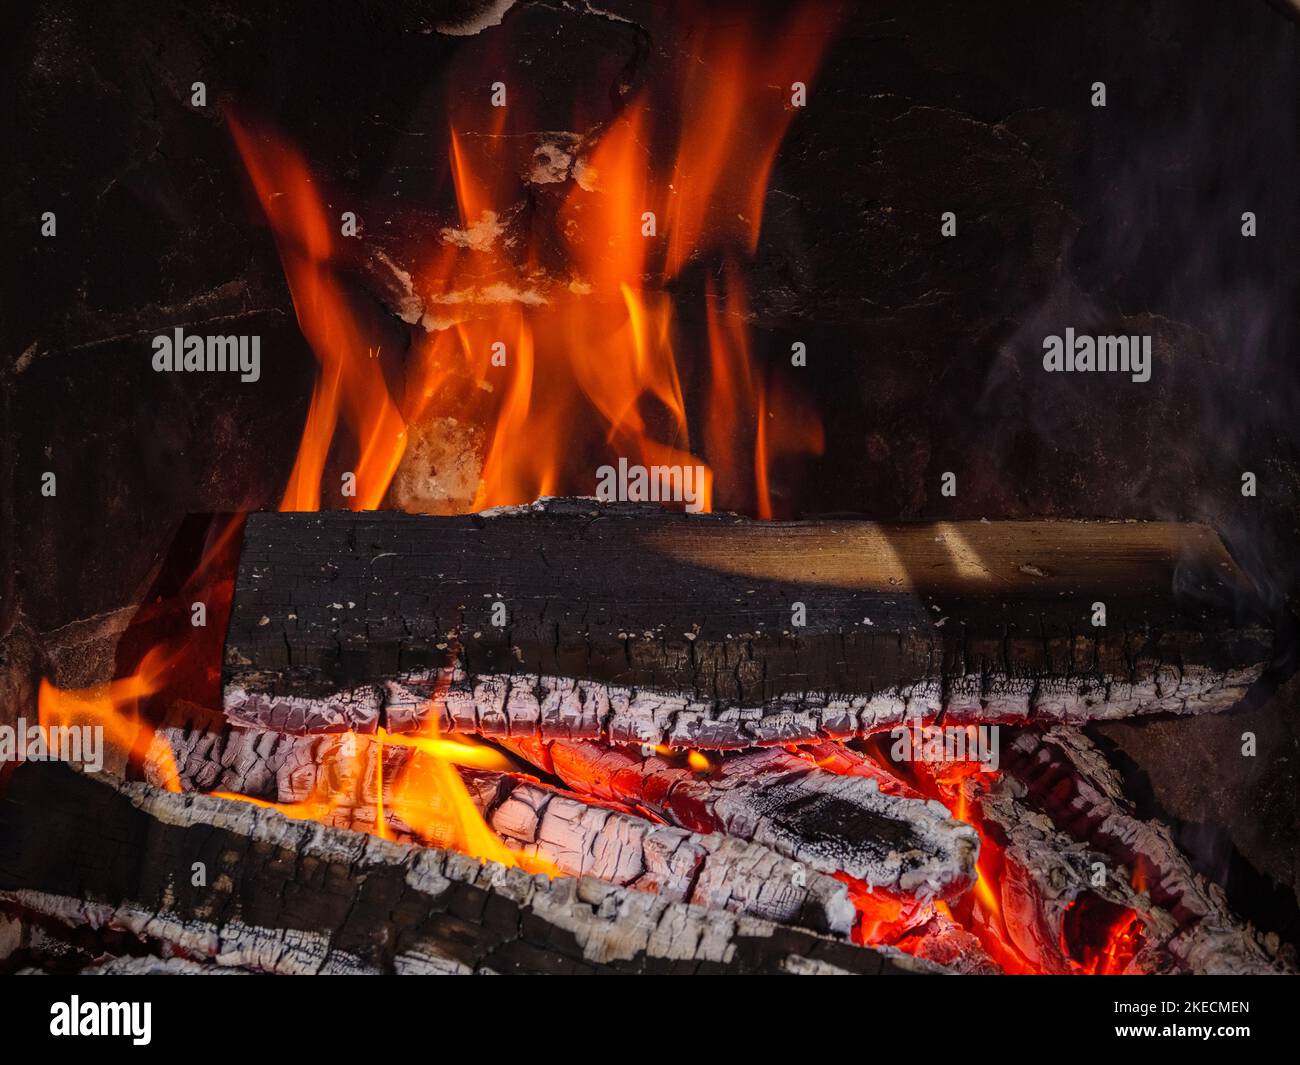 Cozy warm atmosphere from the fireplace with burning firewood Stock Photo